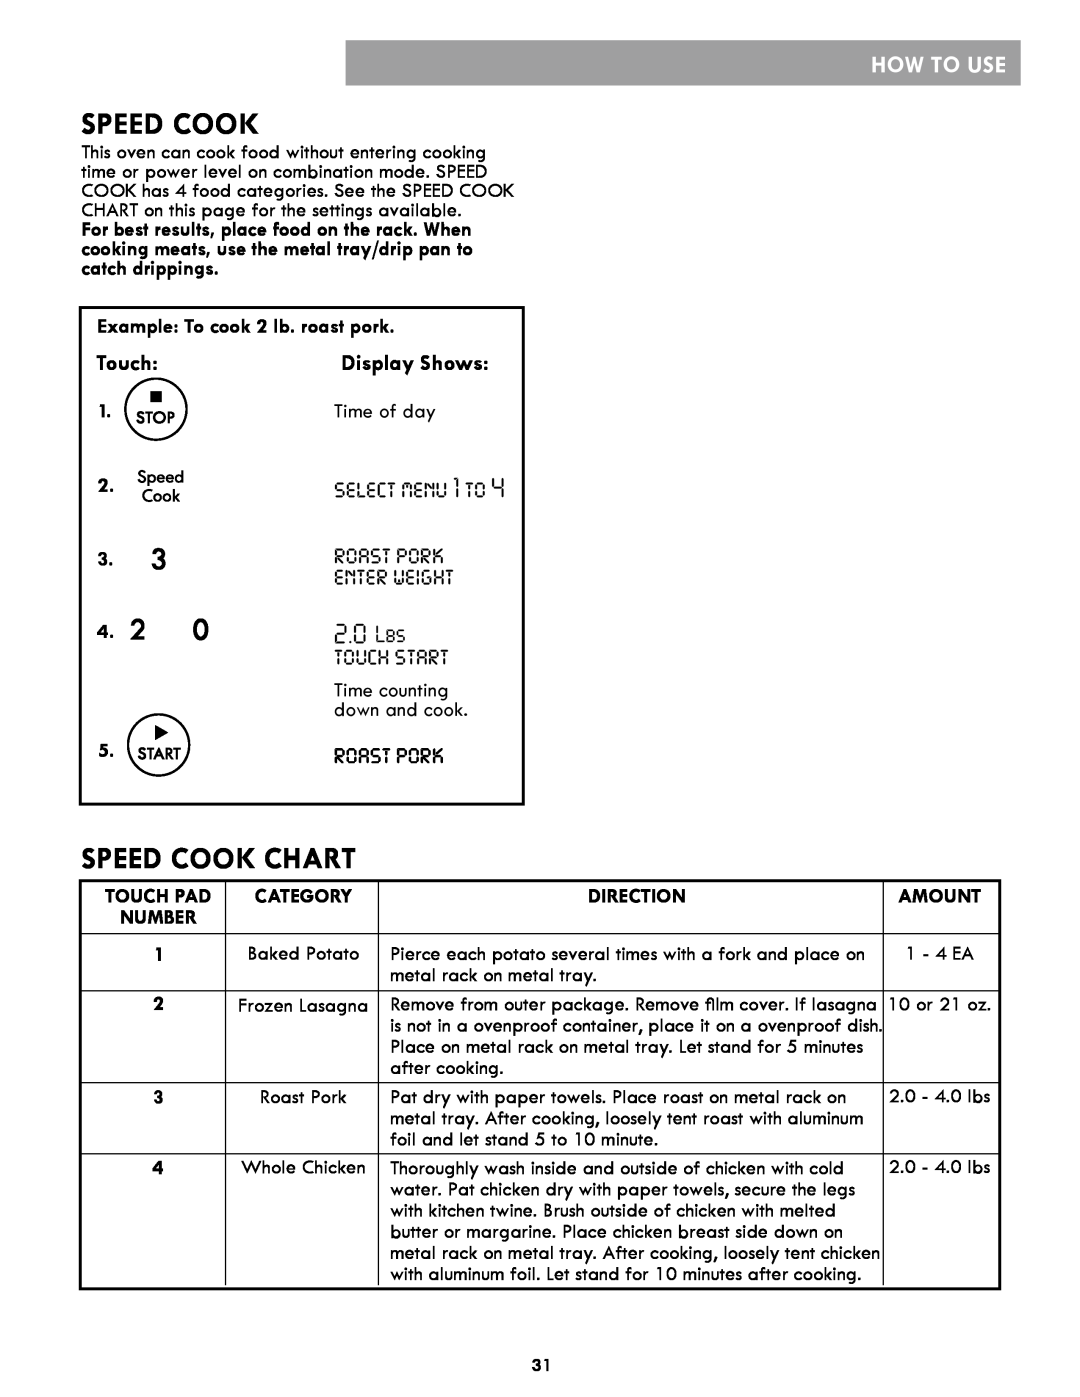 Kenmore 86019 Speed Cook Chart, 2.0 Lbs, Example To cook 2 lb. roast pork, How To Use, enter weight, touch start 